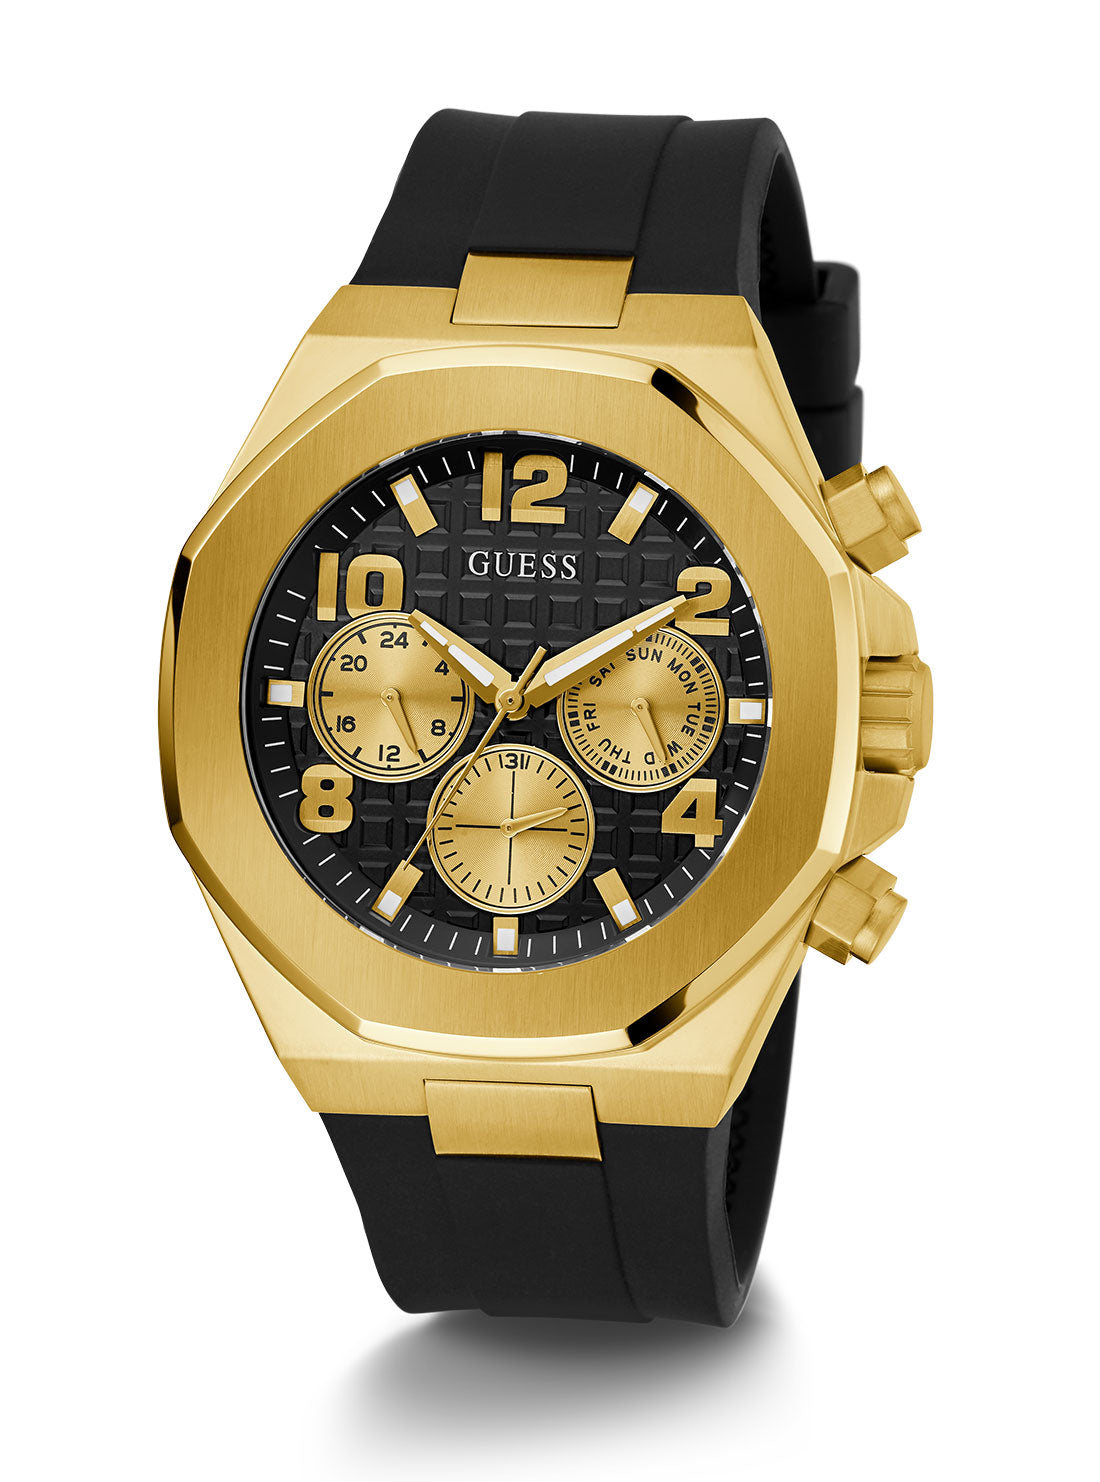 GUESS Men's Gold Empire Silicone Watch GW0583G2 Full View